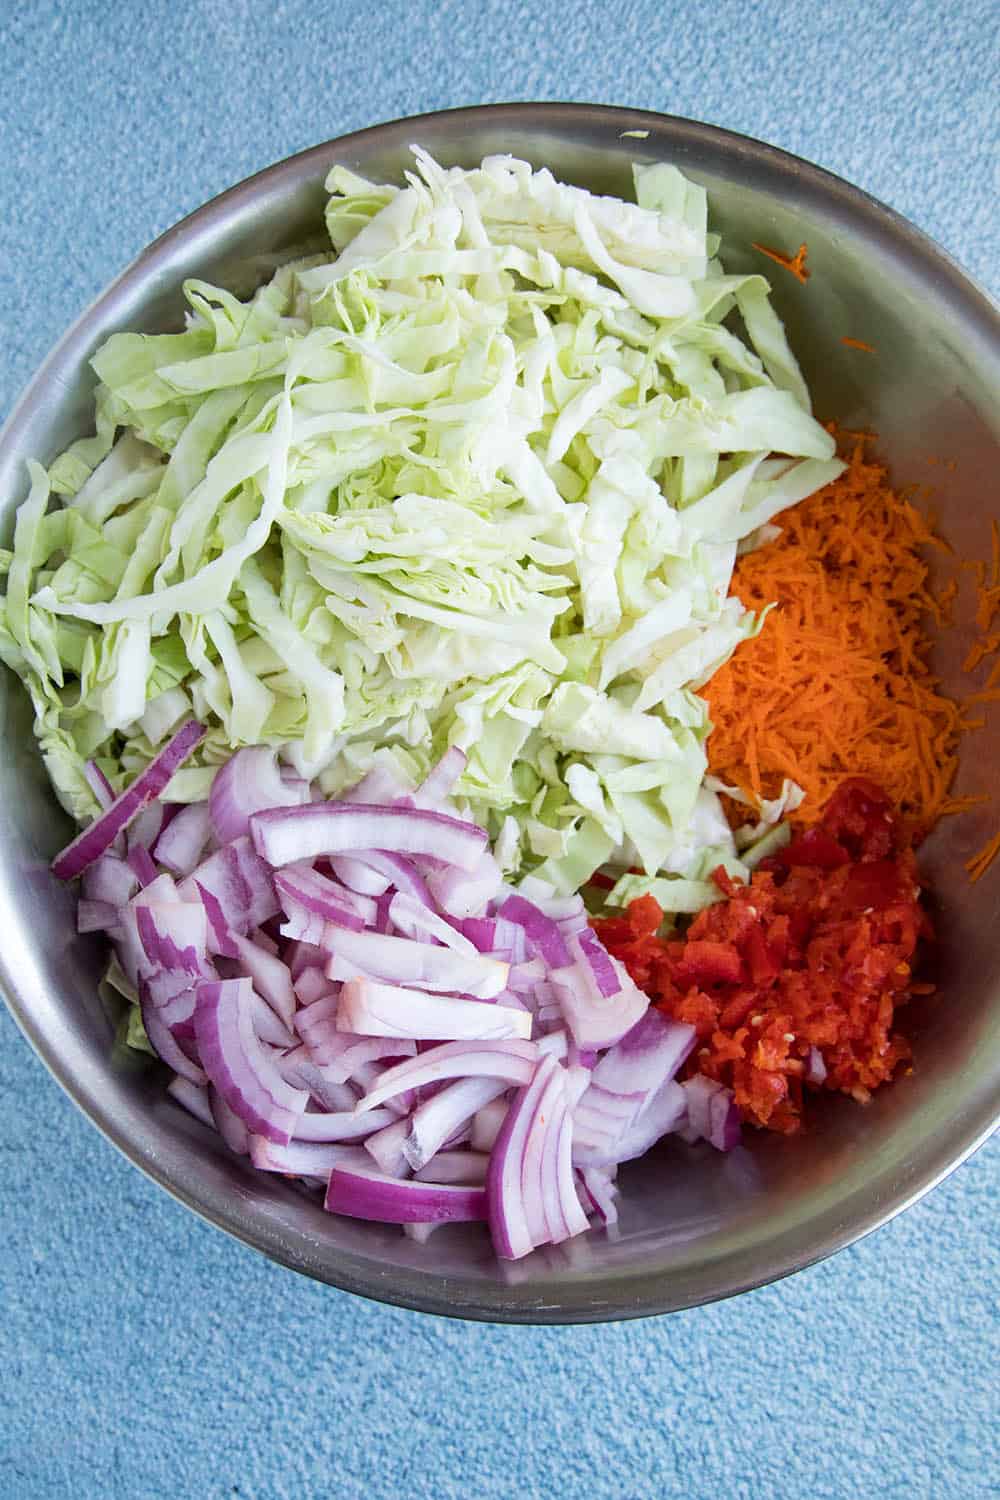 Shredded cabbage, onion, bell pepper and carrot